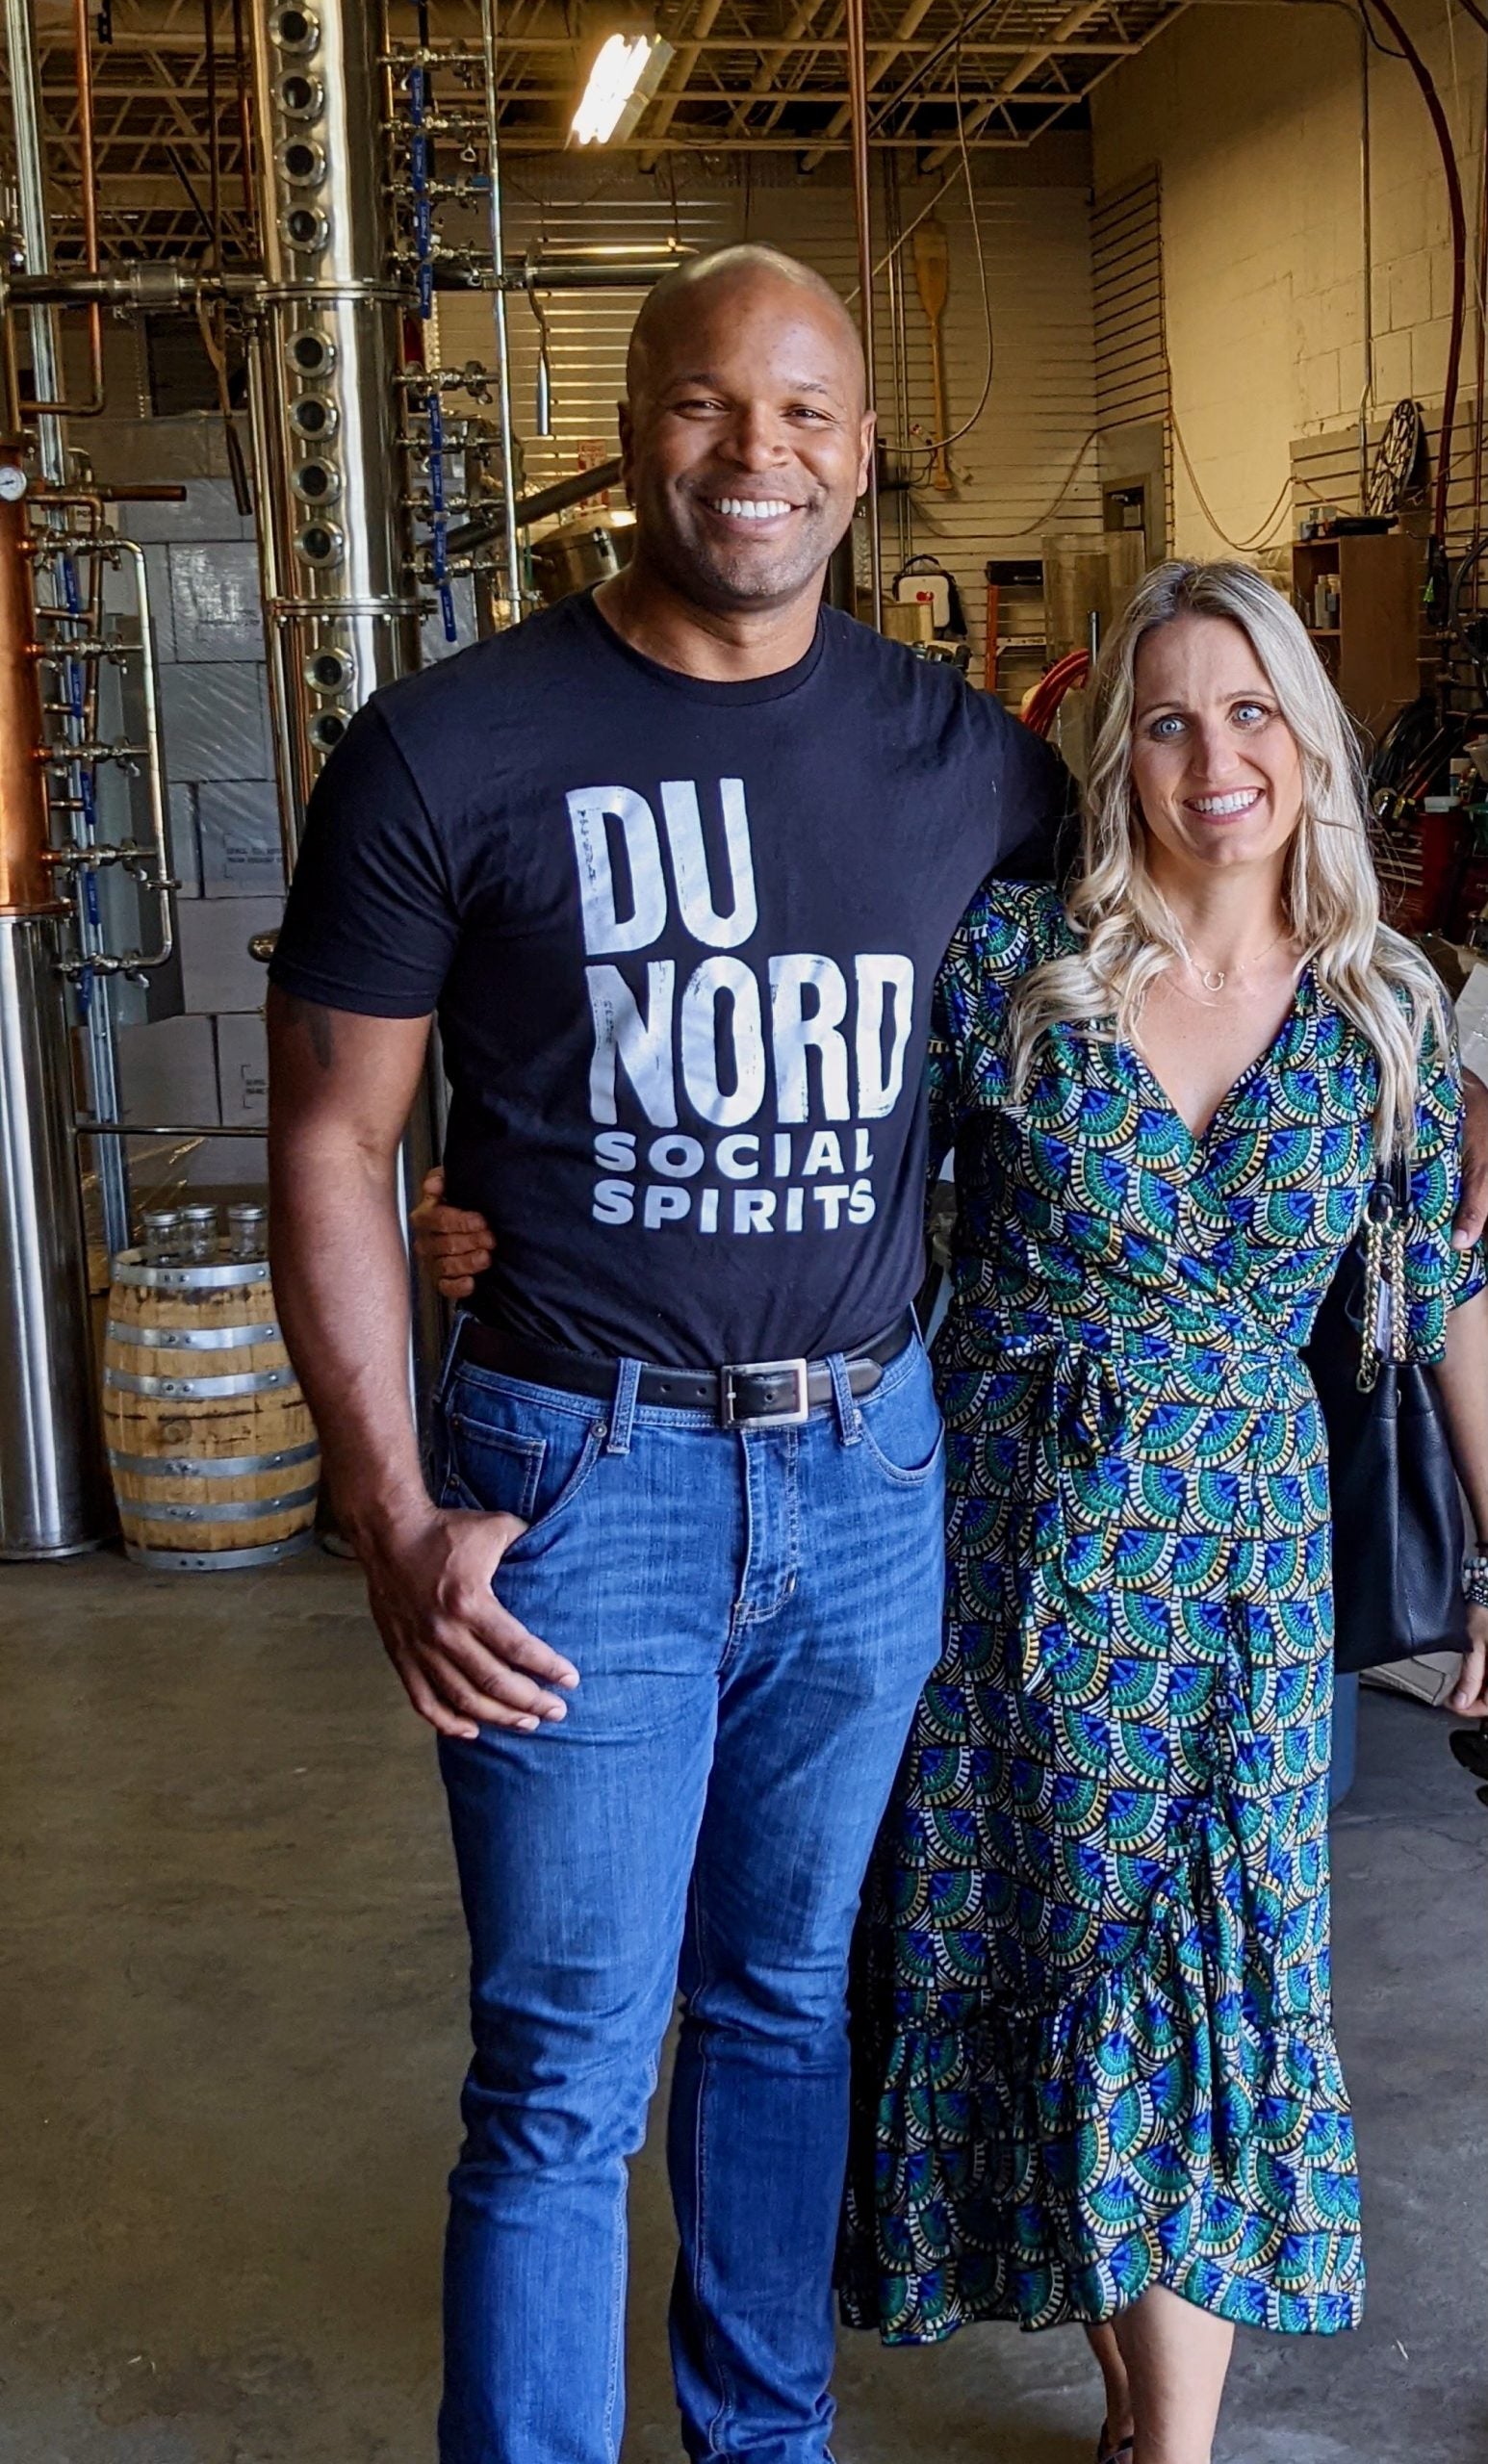 Black-Owned Du Nord Social Spirits Is Celebrating Its 10-Year Anniversary